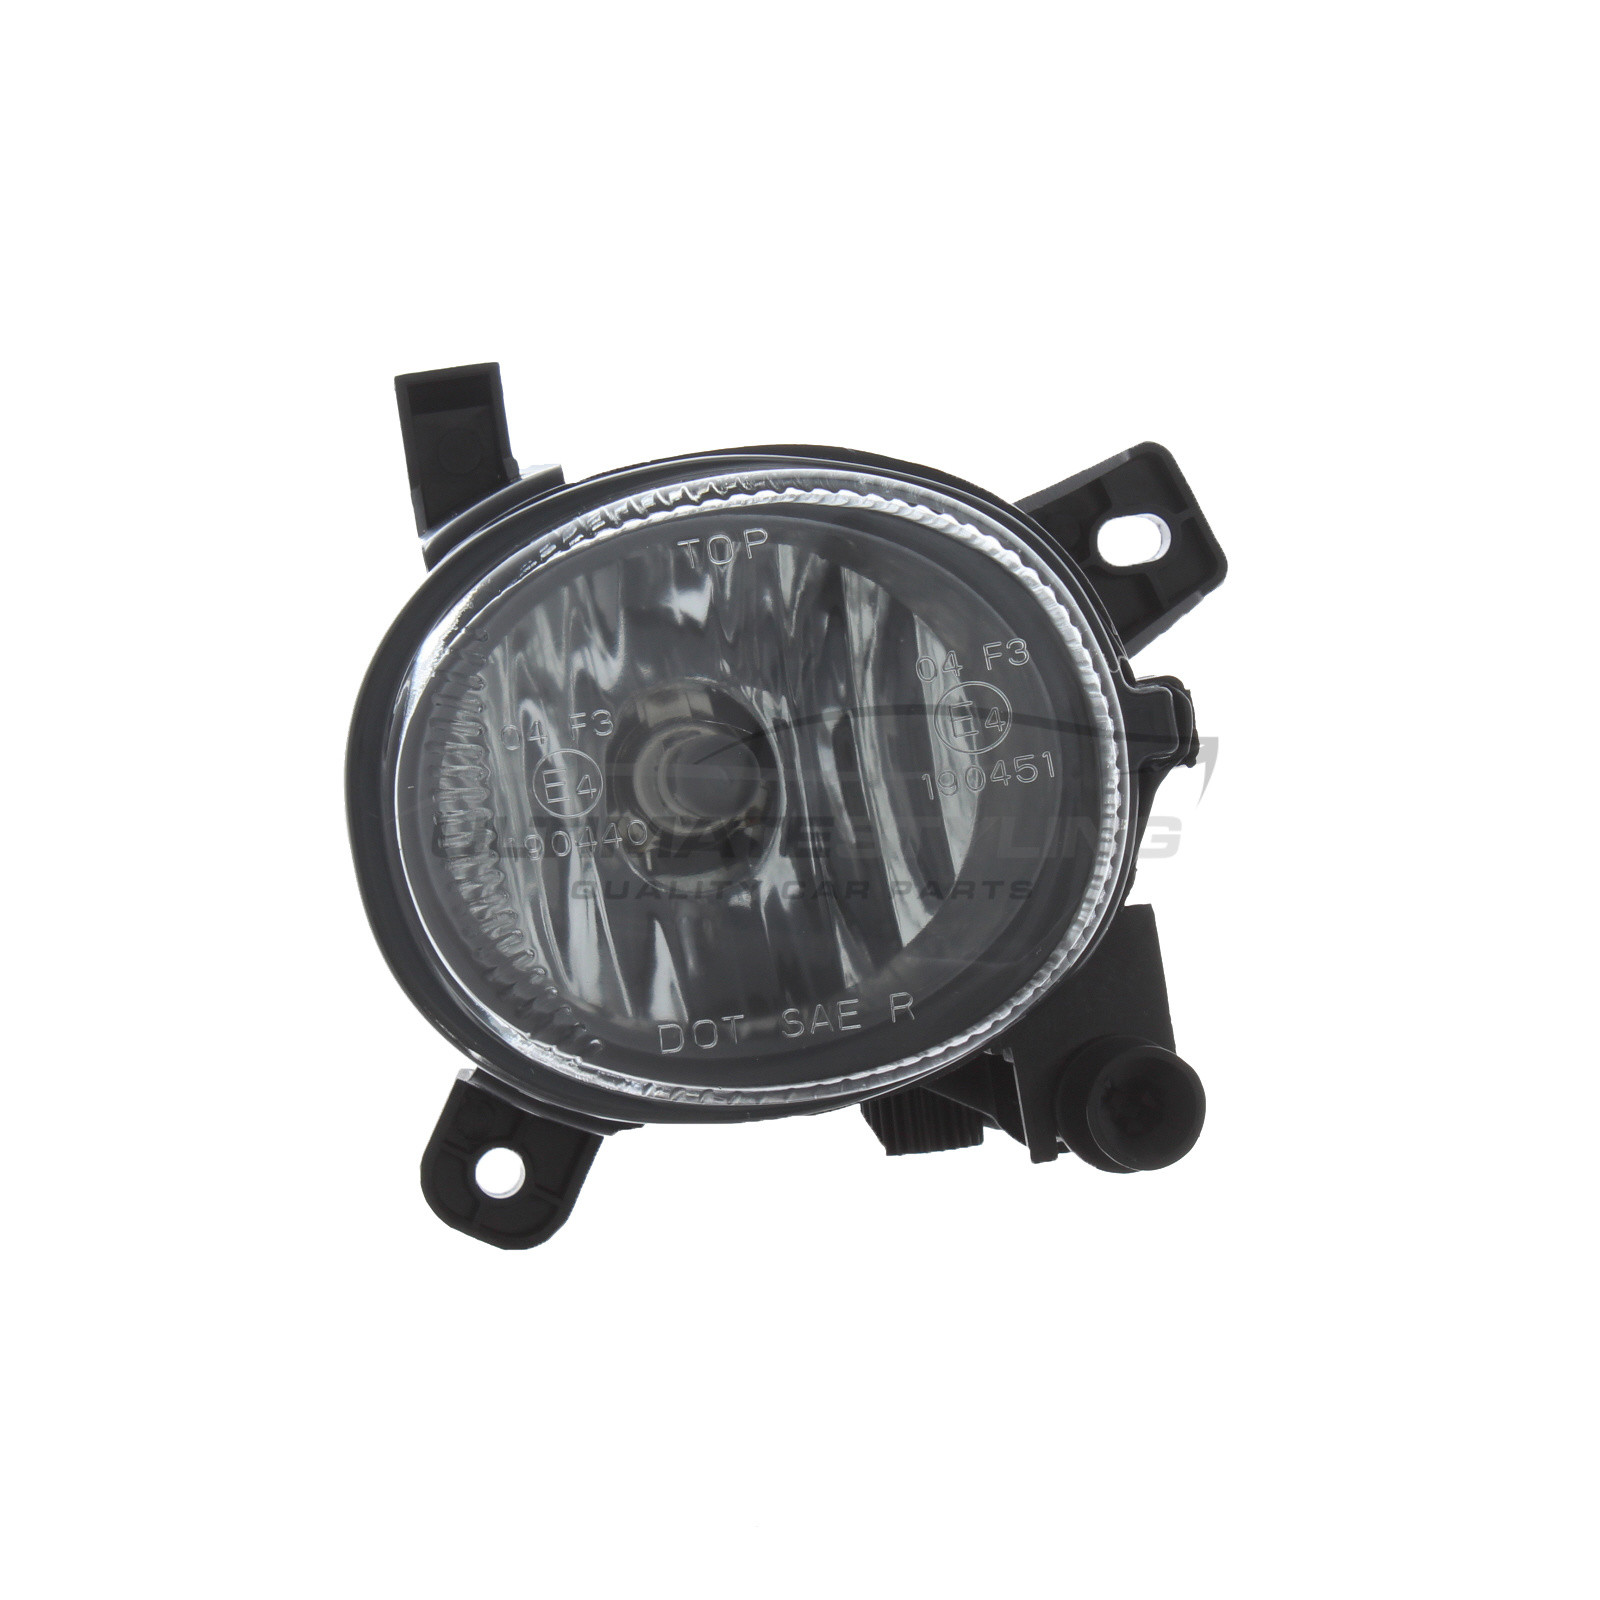 Audi A1 / A4 / A5 / A6 / Q3 / RS5 / RS6 / S4 / S5 / S6, VW Passat Front Fog Light - Drivers Side (RH) - Non-LED